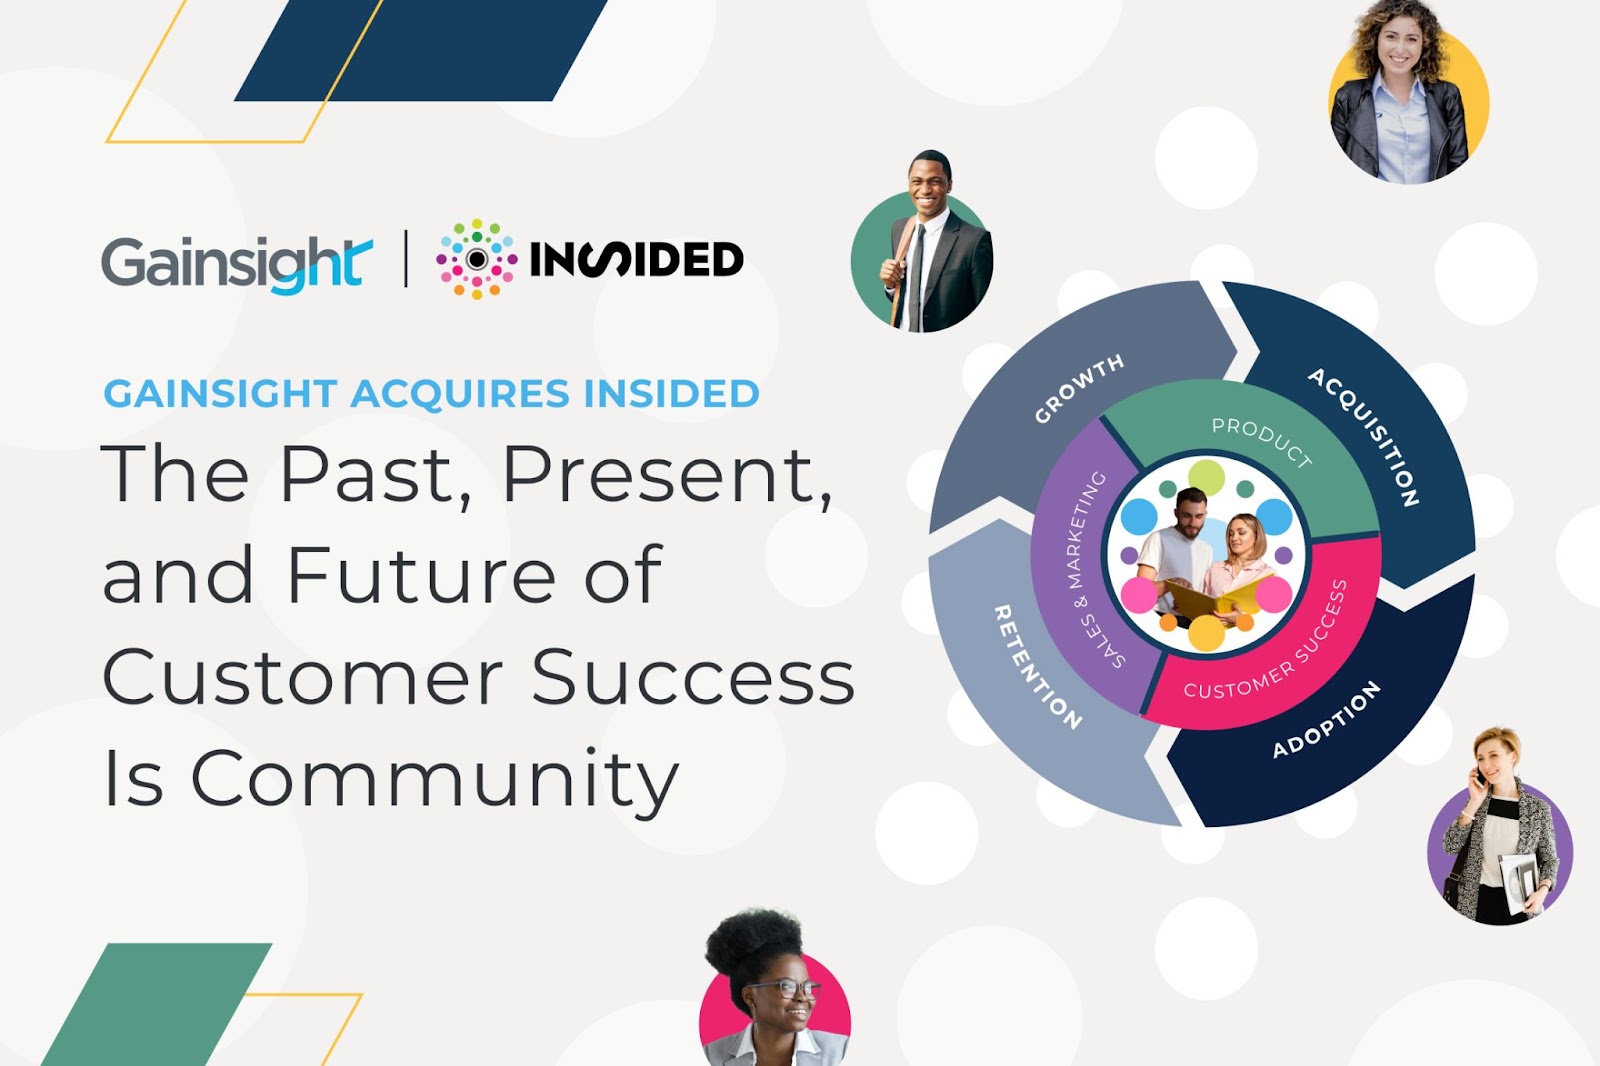 Gainsight Acquires inSided: The Past, Present, and Future of Customer Success Is Community